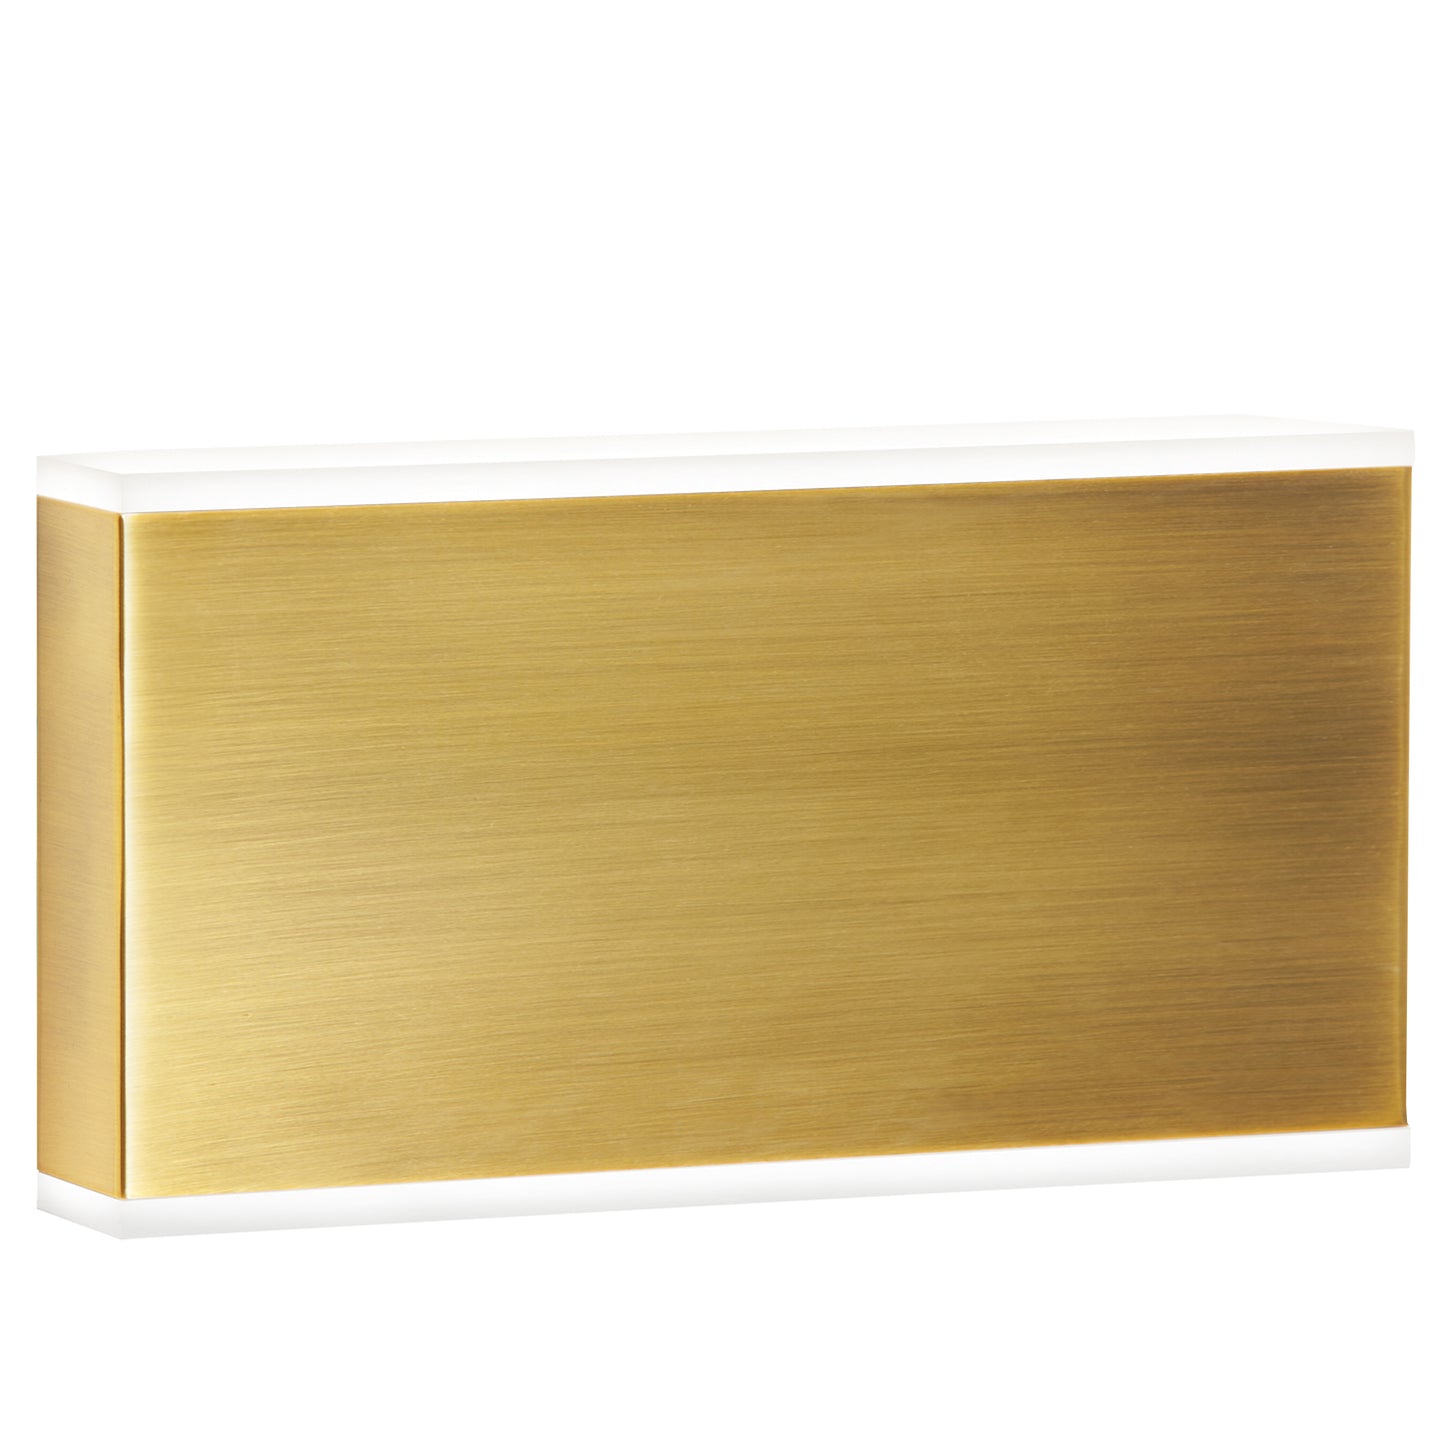 Dainolite EMY-105-20W-AGB 20W Wall Sconce, Aged Brass with Frosted Acrylic Diffuser